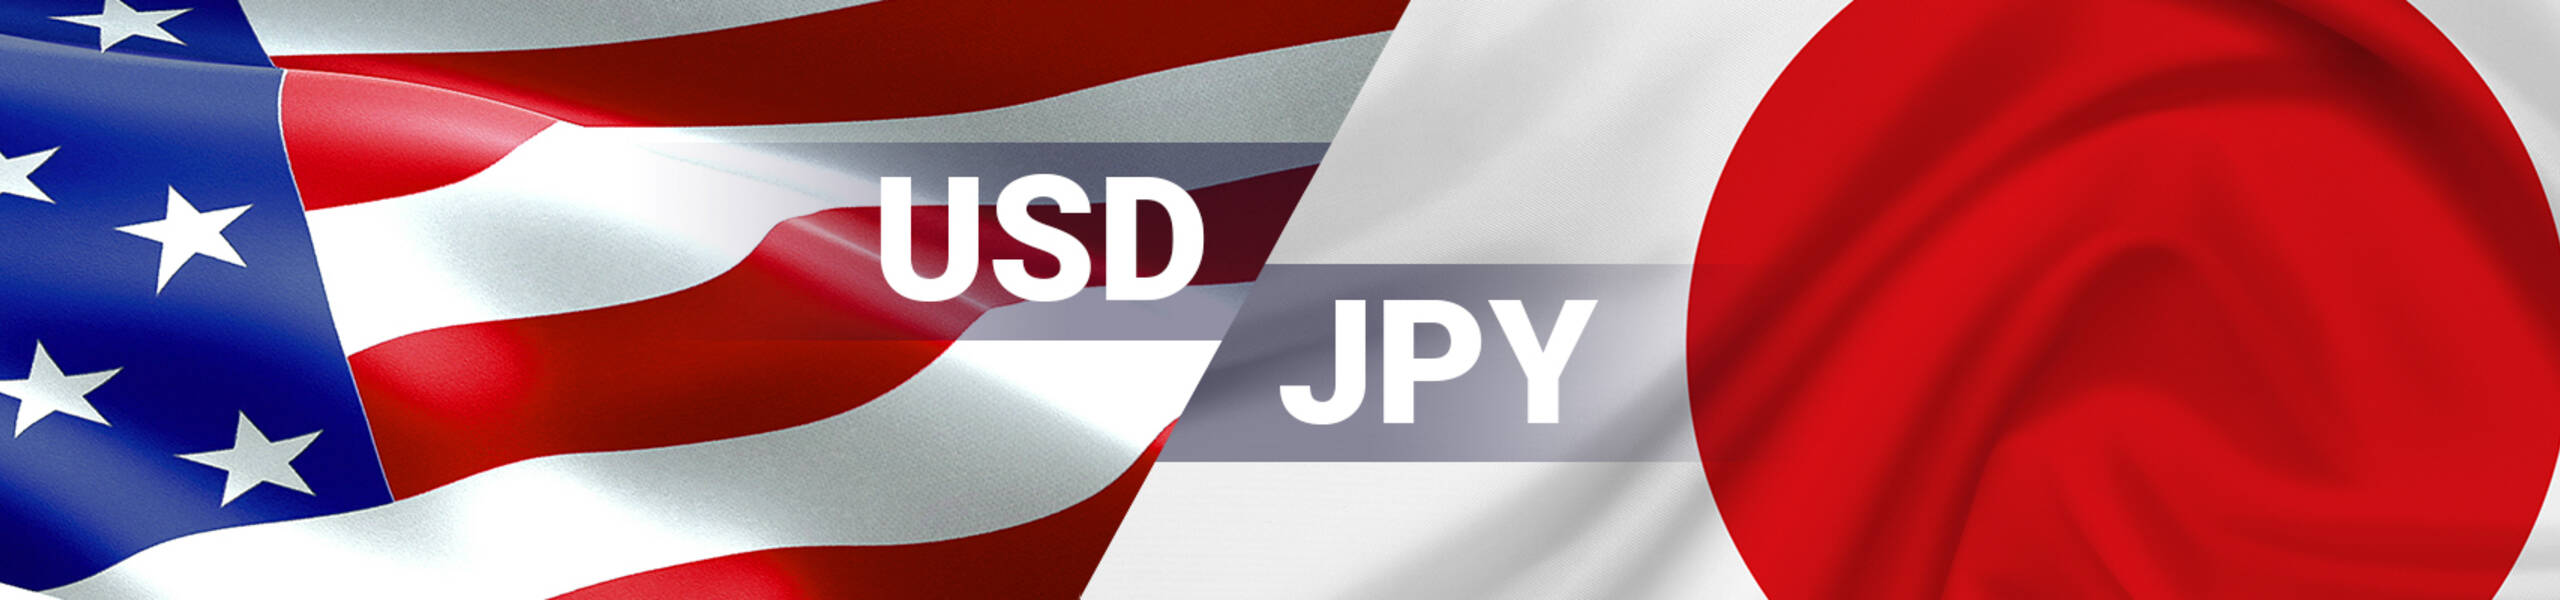 USD/JPY Dailyレポート 2017/06/13